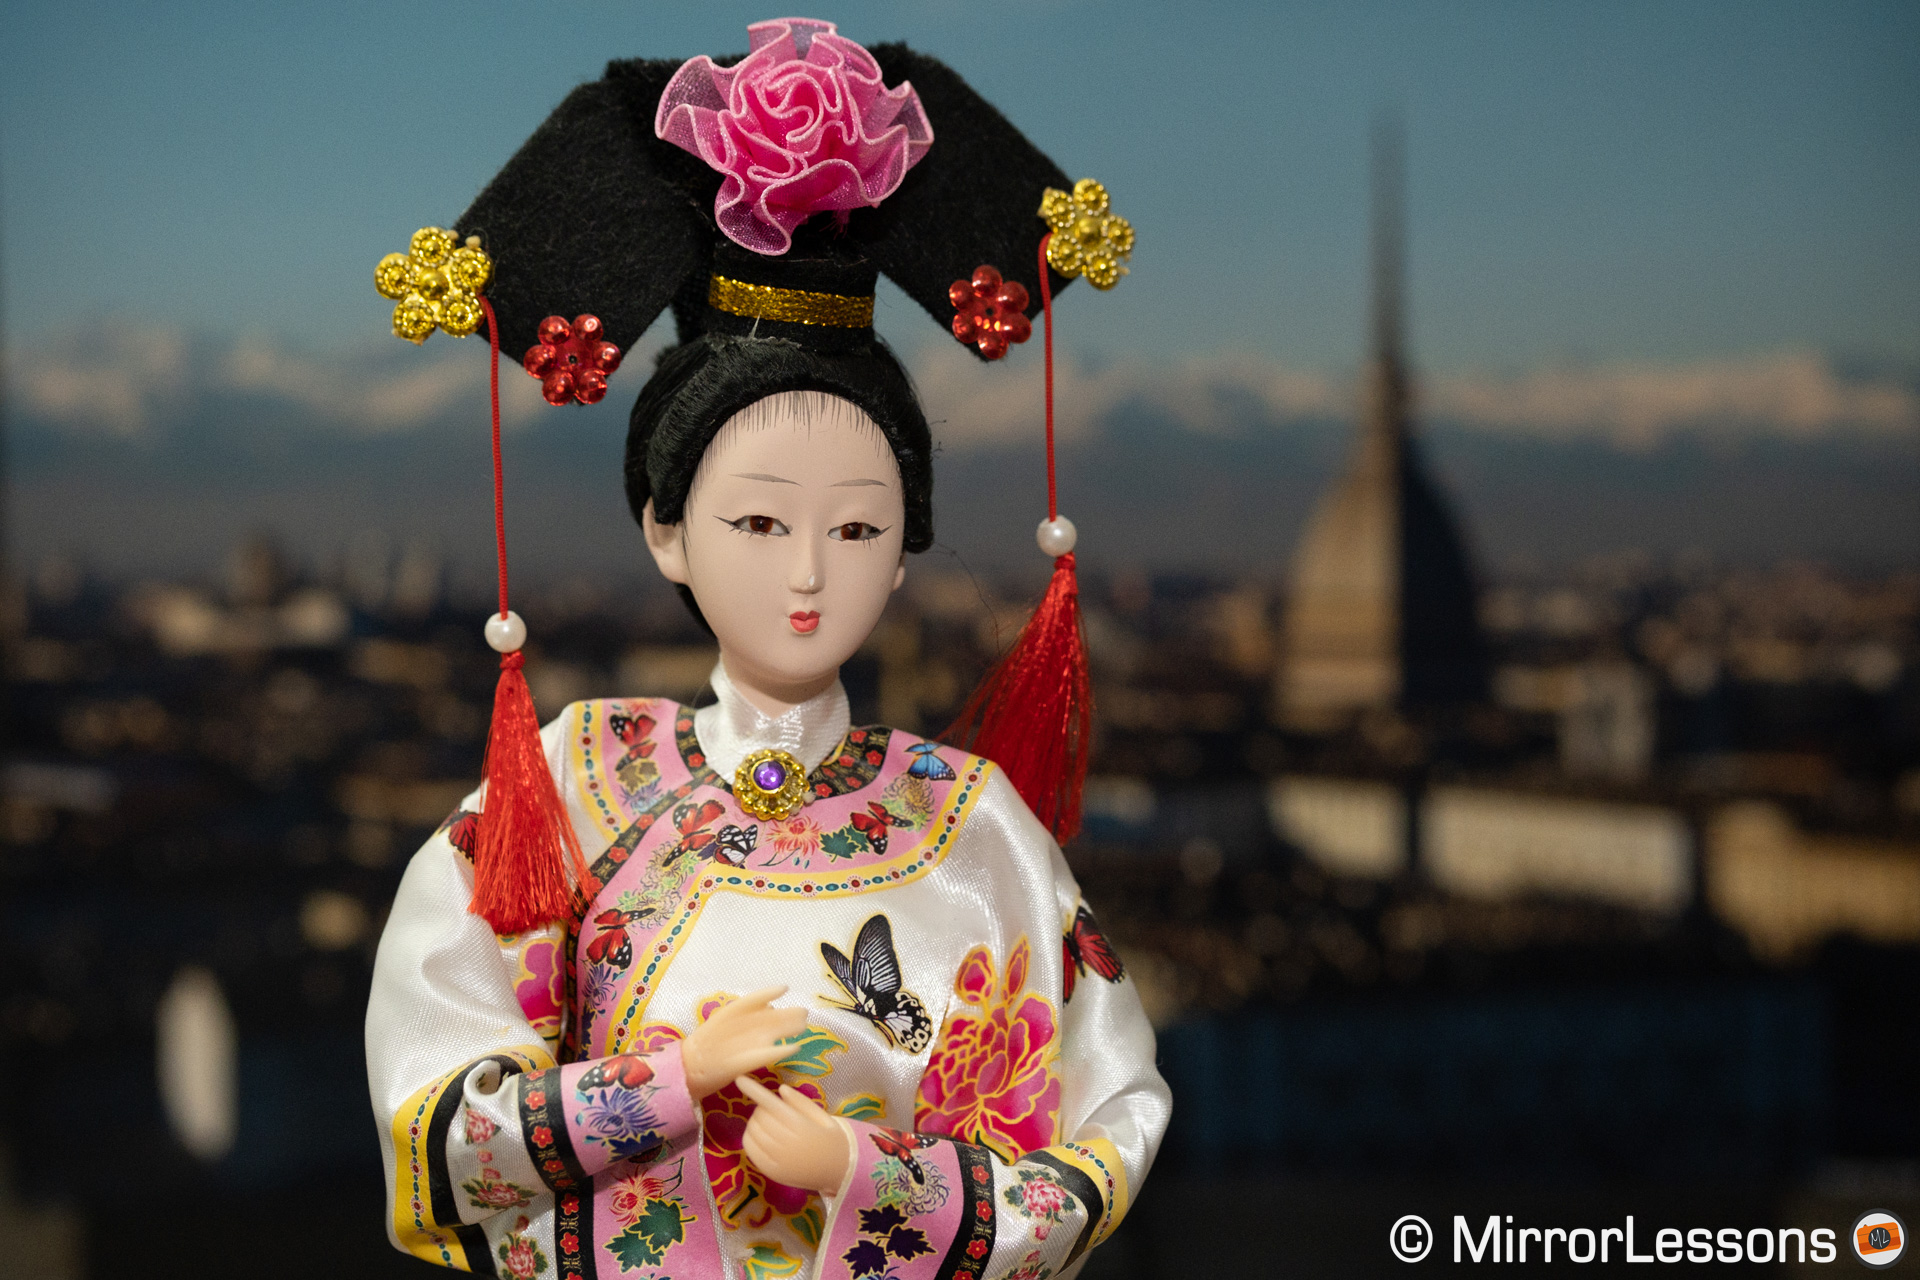 Japanese doll with a cityscape background